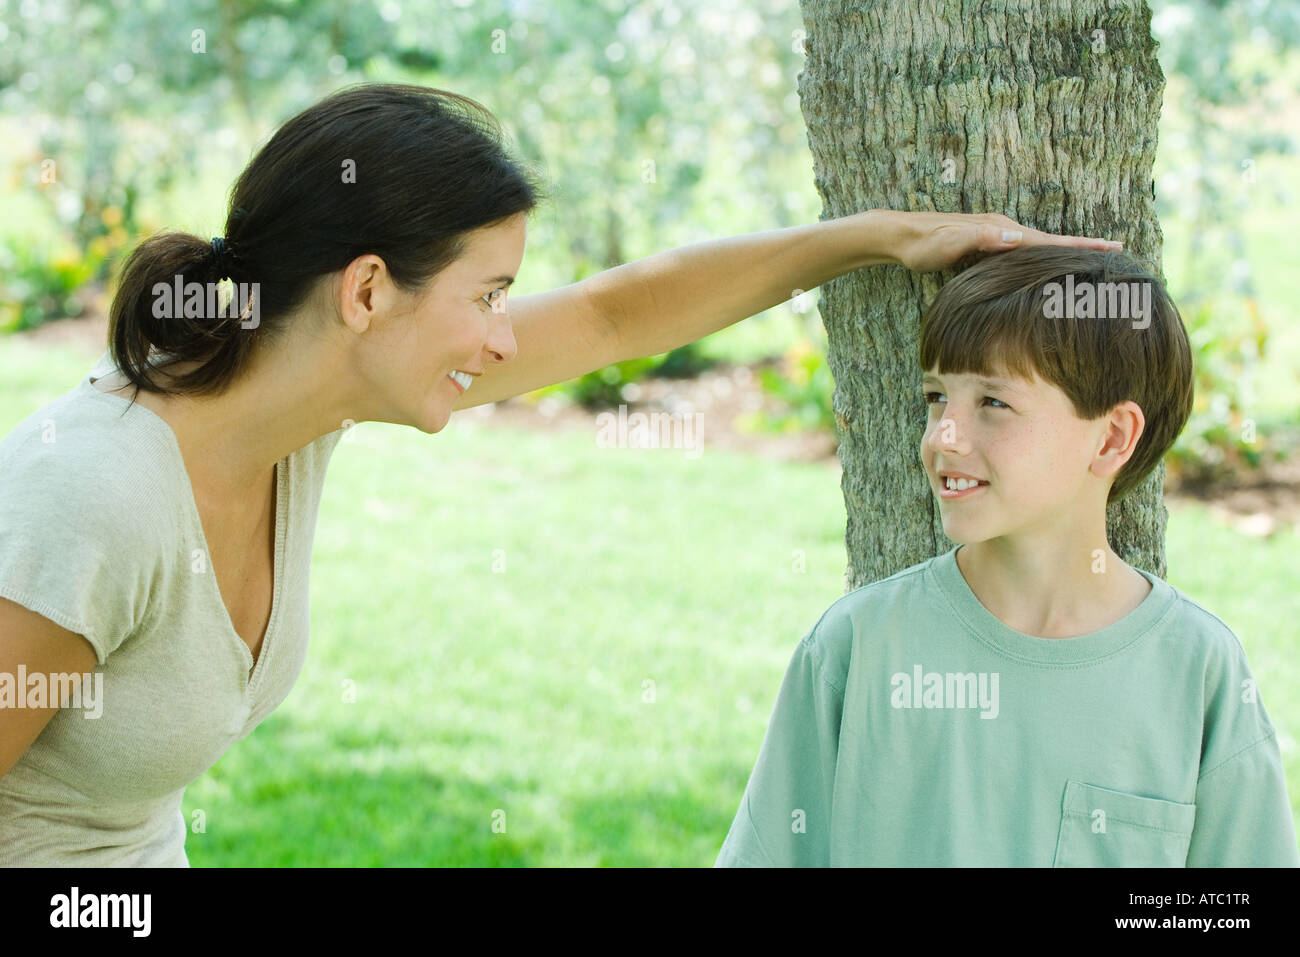 Boy leaning against tree trunk, his mother placing her hand on his head, both smiling Stock Photo